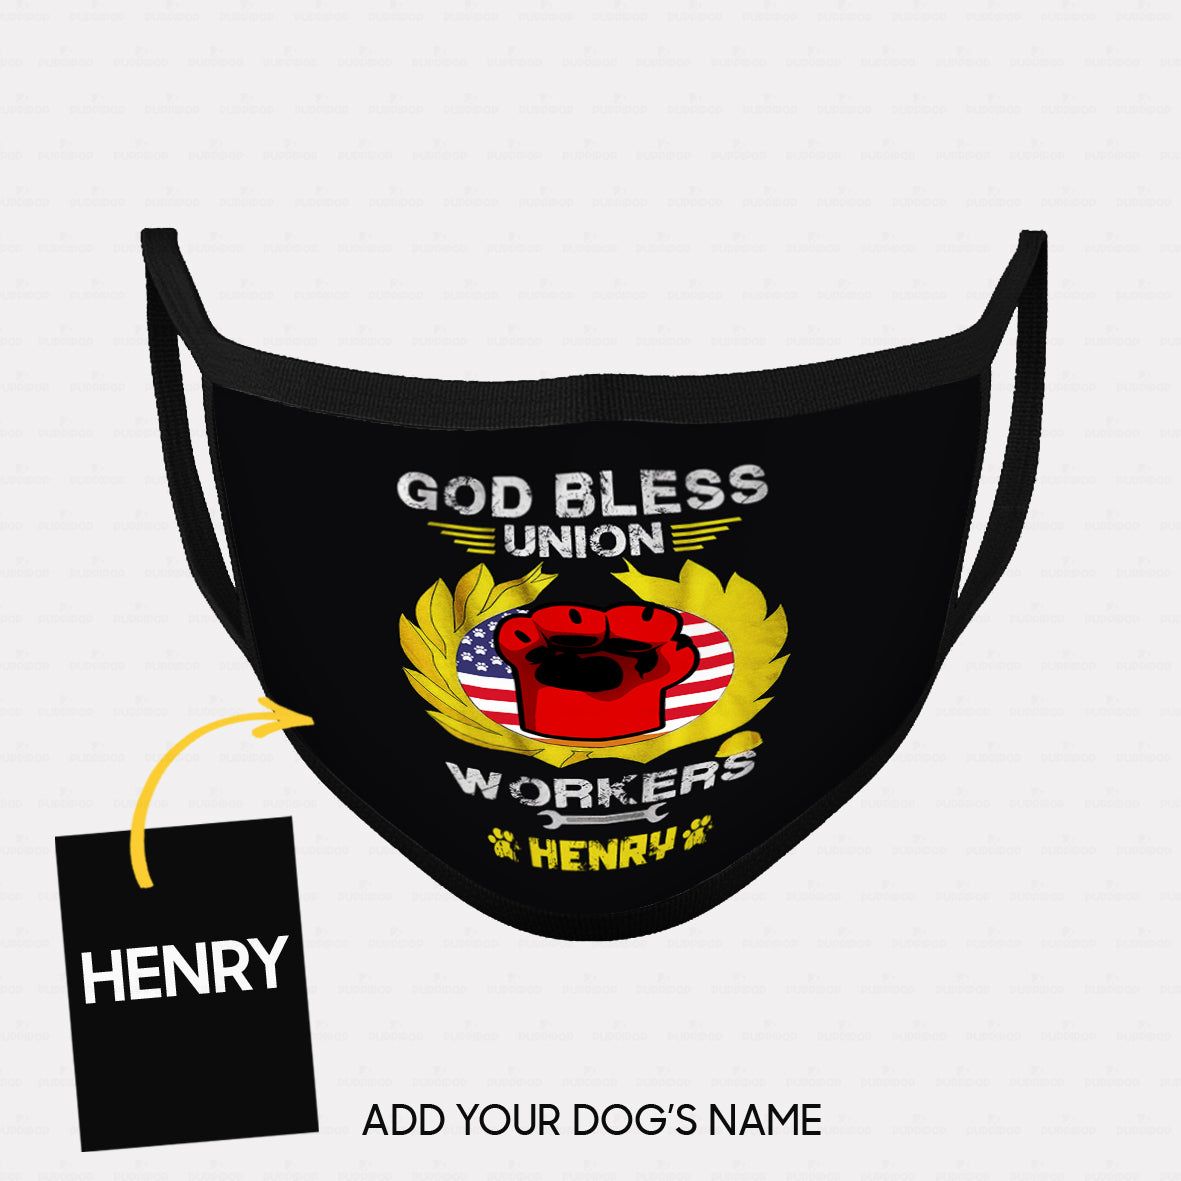 Personalized Dog Mask Gift Idea - God Bless Workers Union For Dog Lovers - Cloth Mask